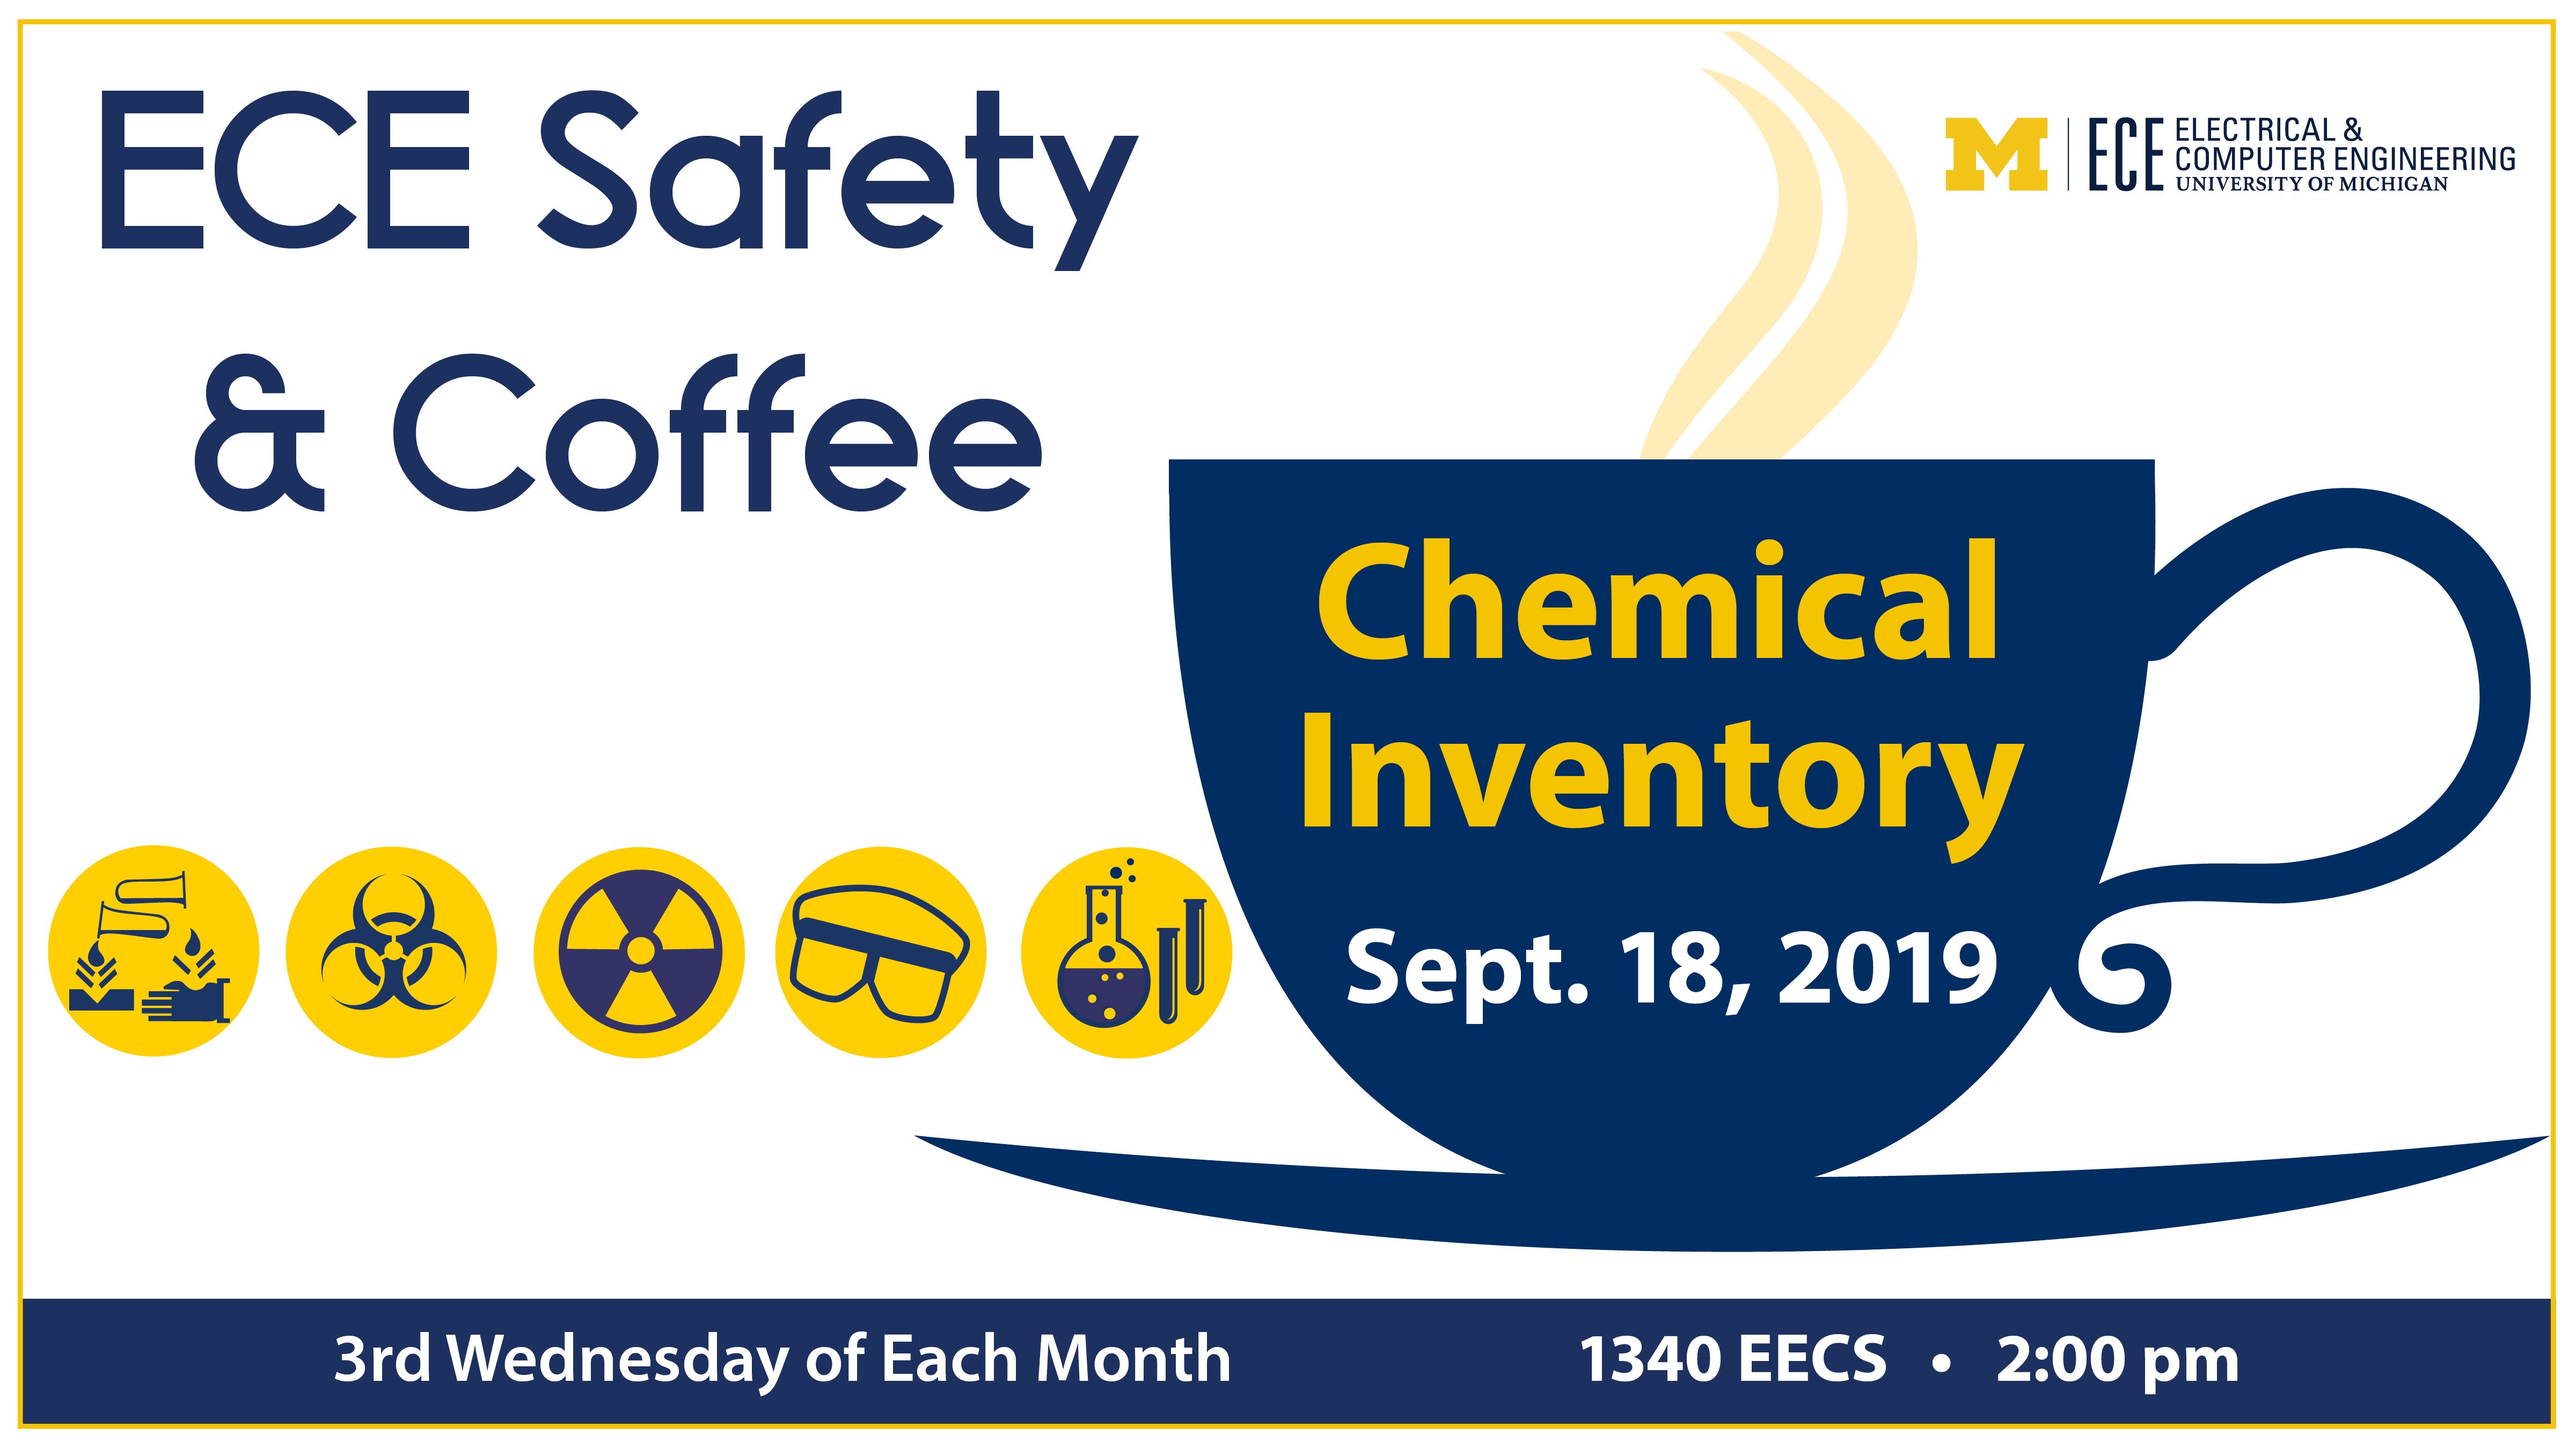 ECE Safety & Coffee (Chemical Inventory) Poster